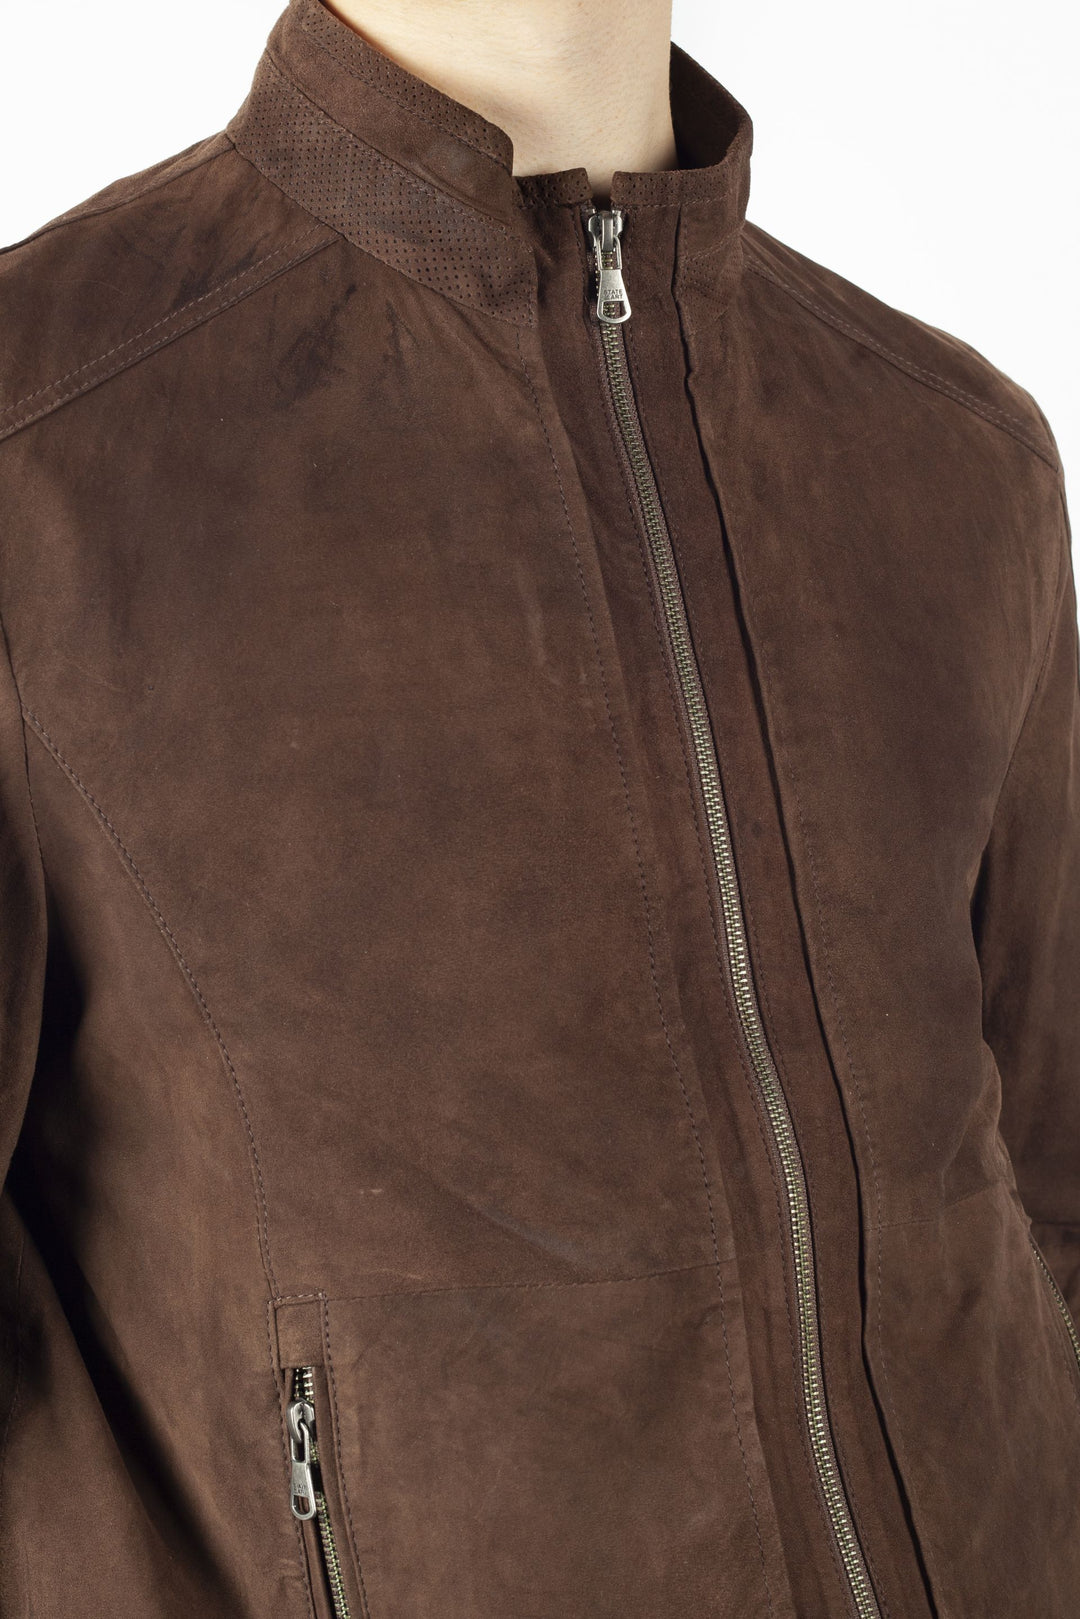 State of Art Leather Goat Suede Modern Classics Veste - Homme - Marron